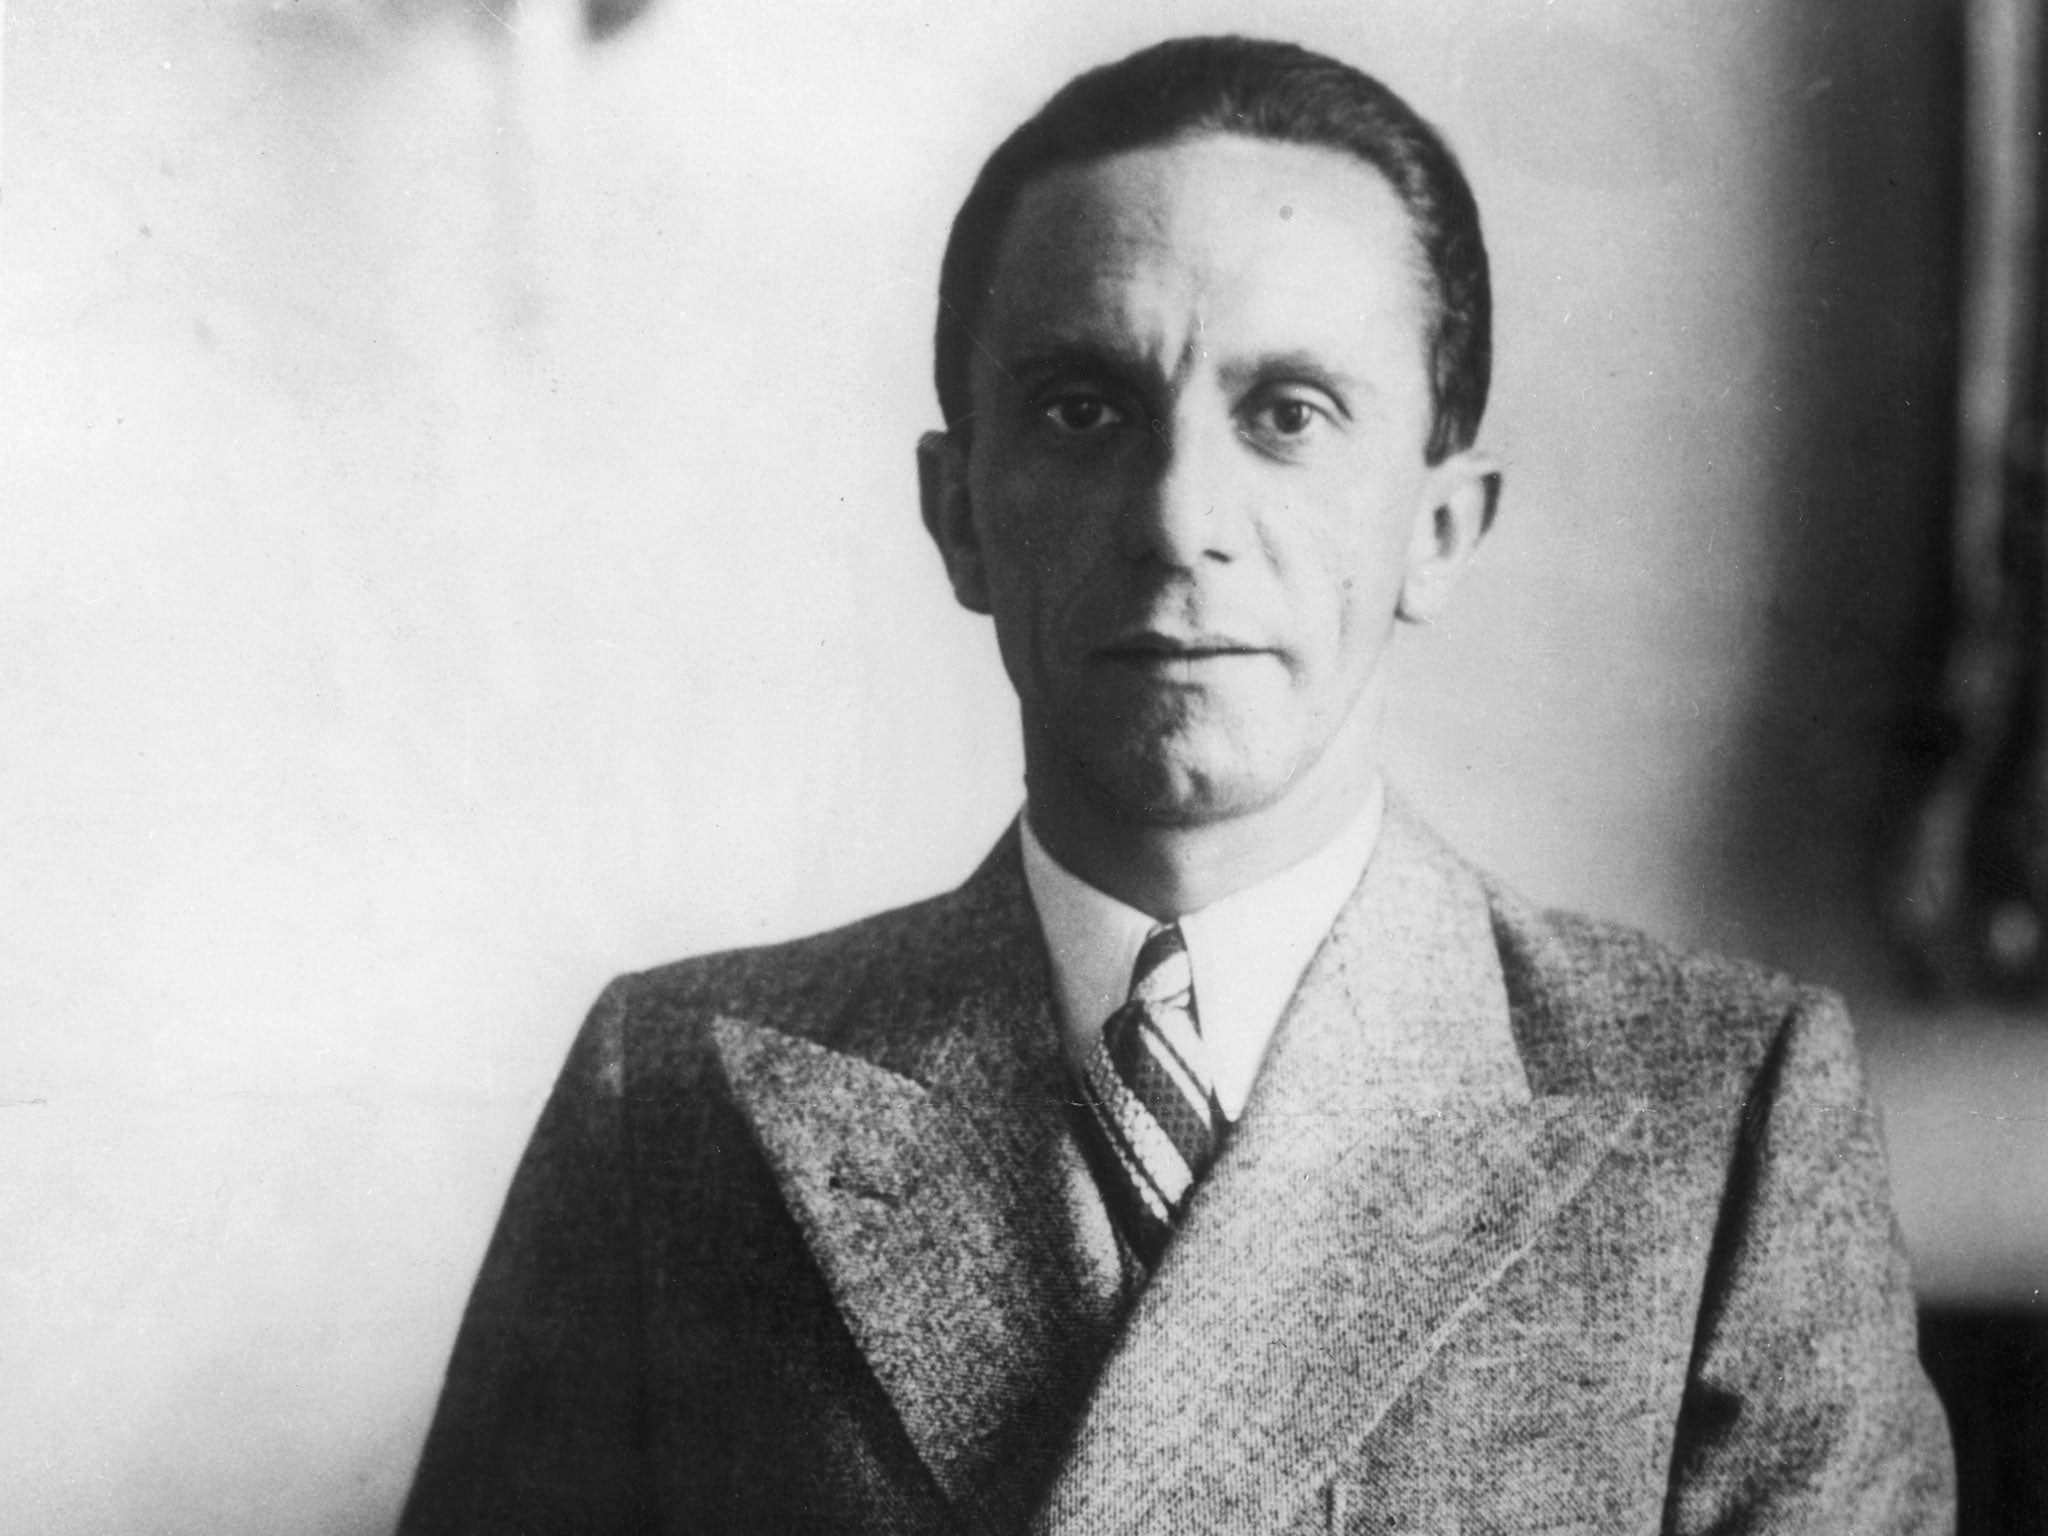 Joseph Goebbels served as Nazi Germany's minister for propaganda from 1933 to 1945